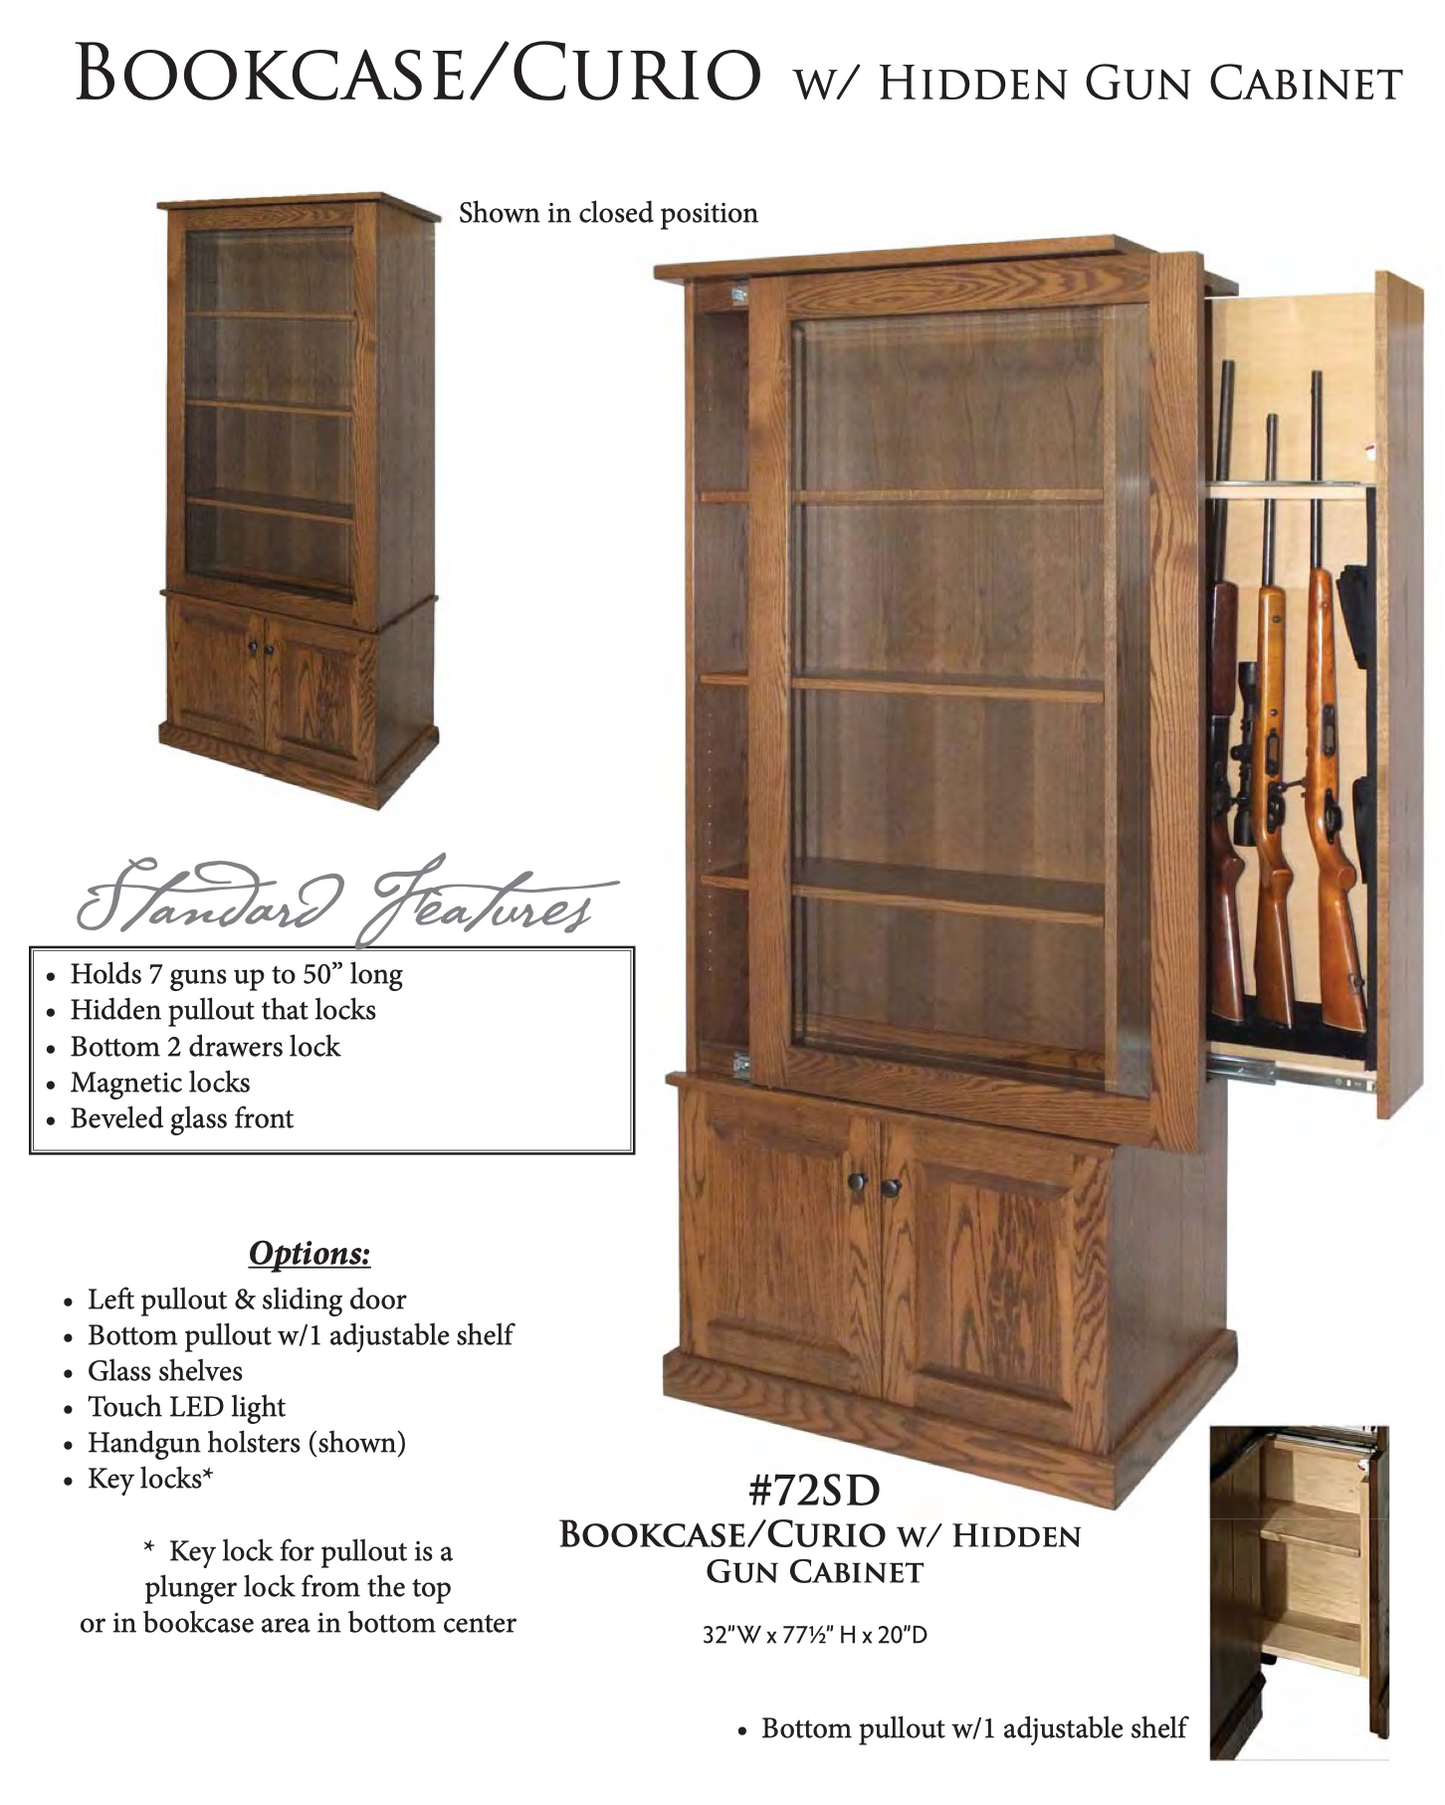 10 Gun Wormy Maple and Walnut Cabinet with Pistol Display